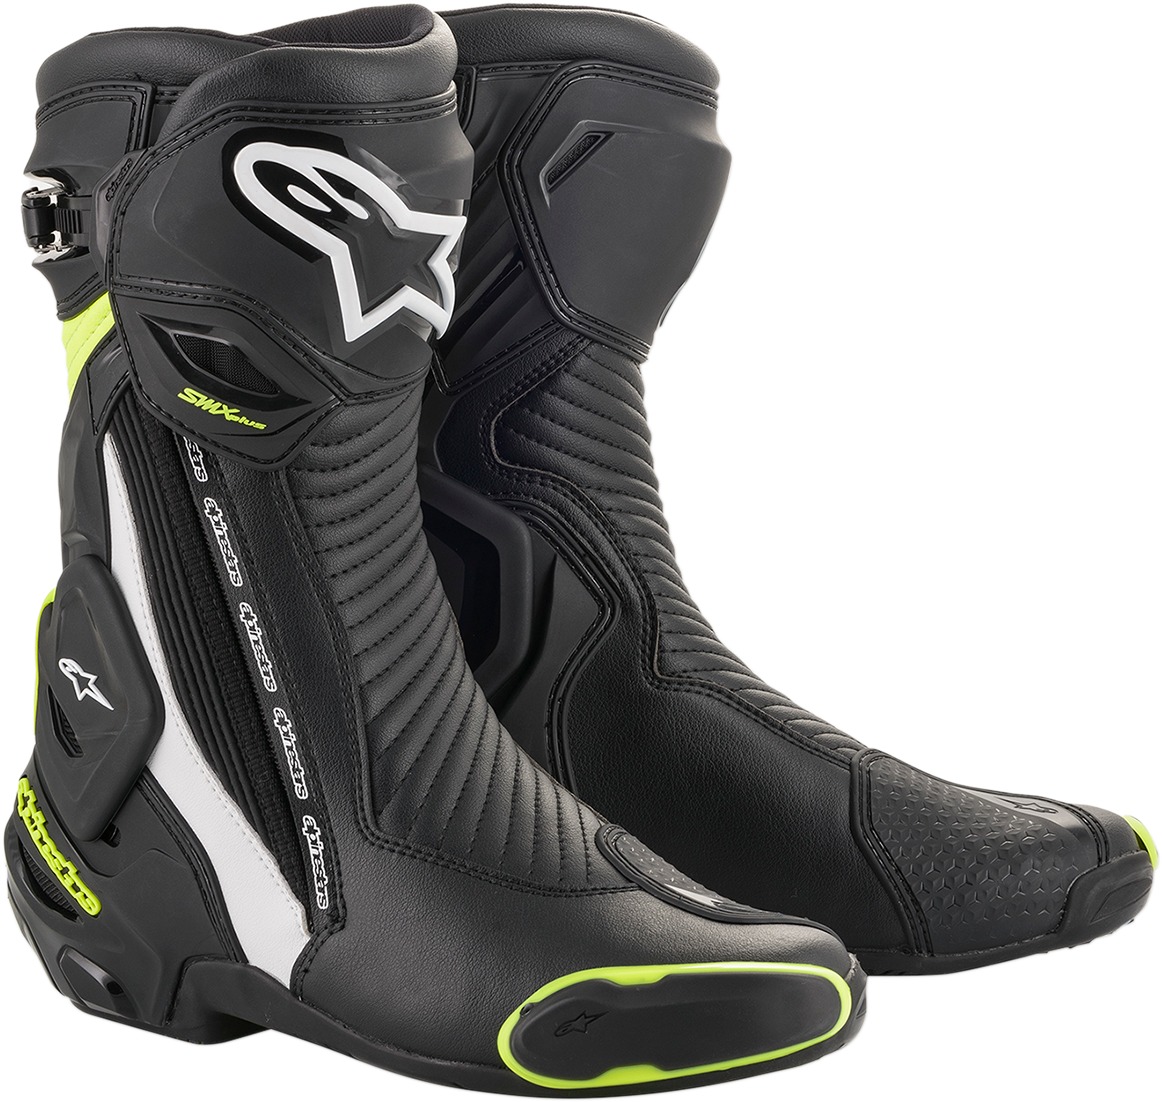 SMX Plus Street Riding Boots Black/White/Yellow US 6 - Click Image to Close